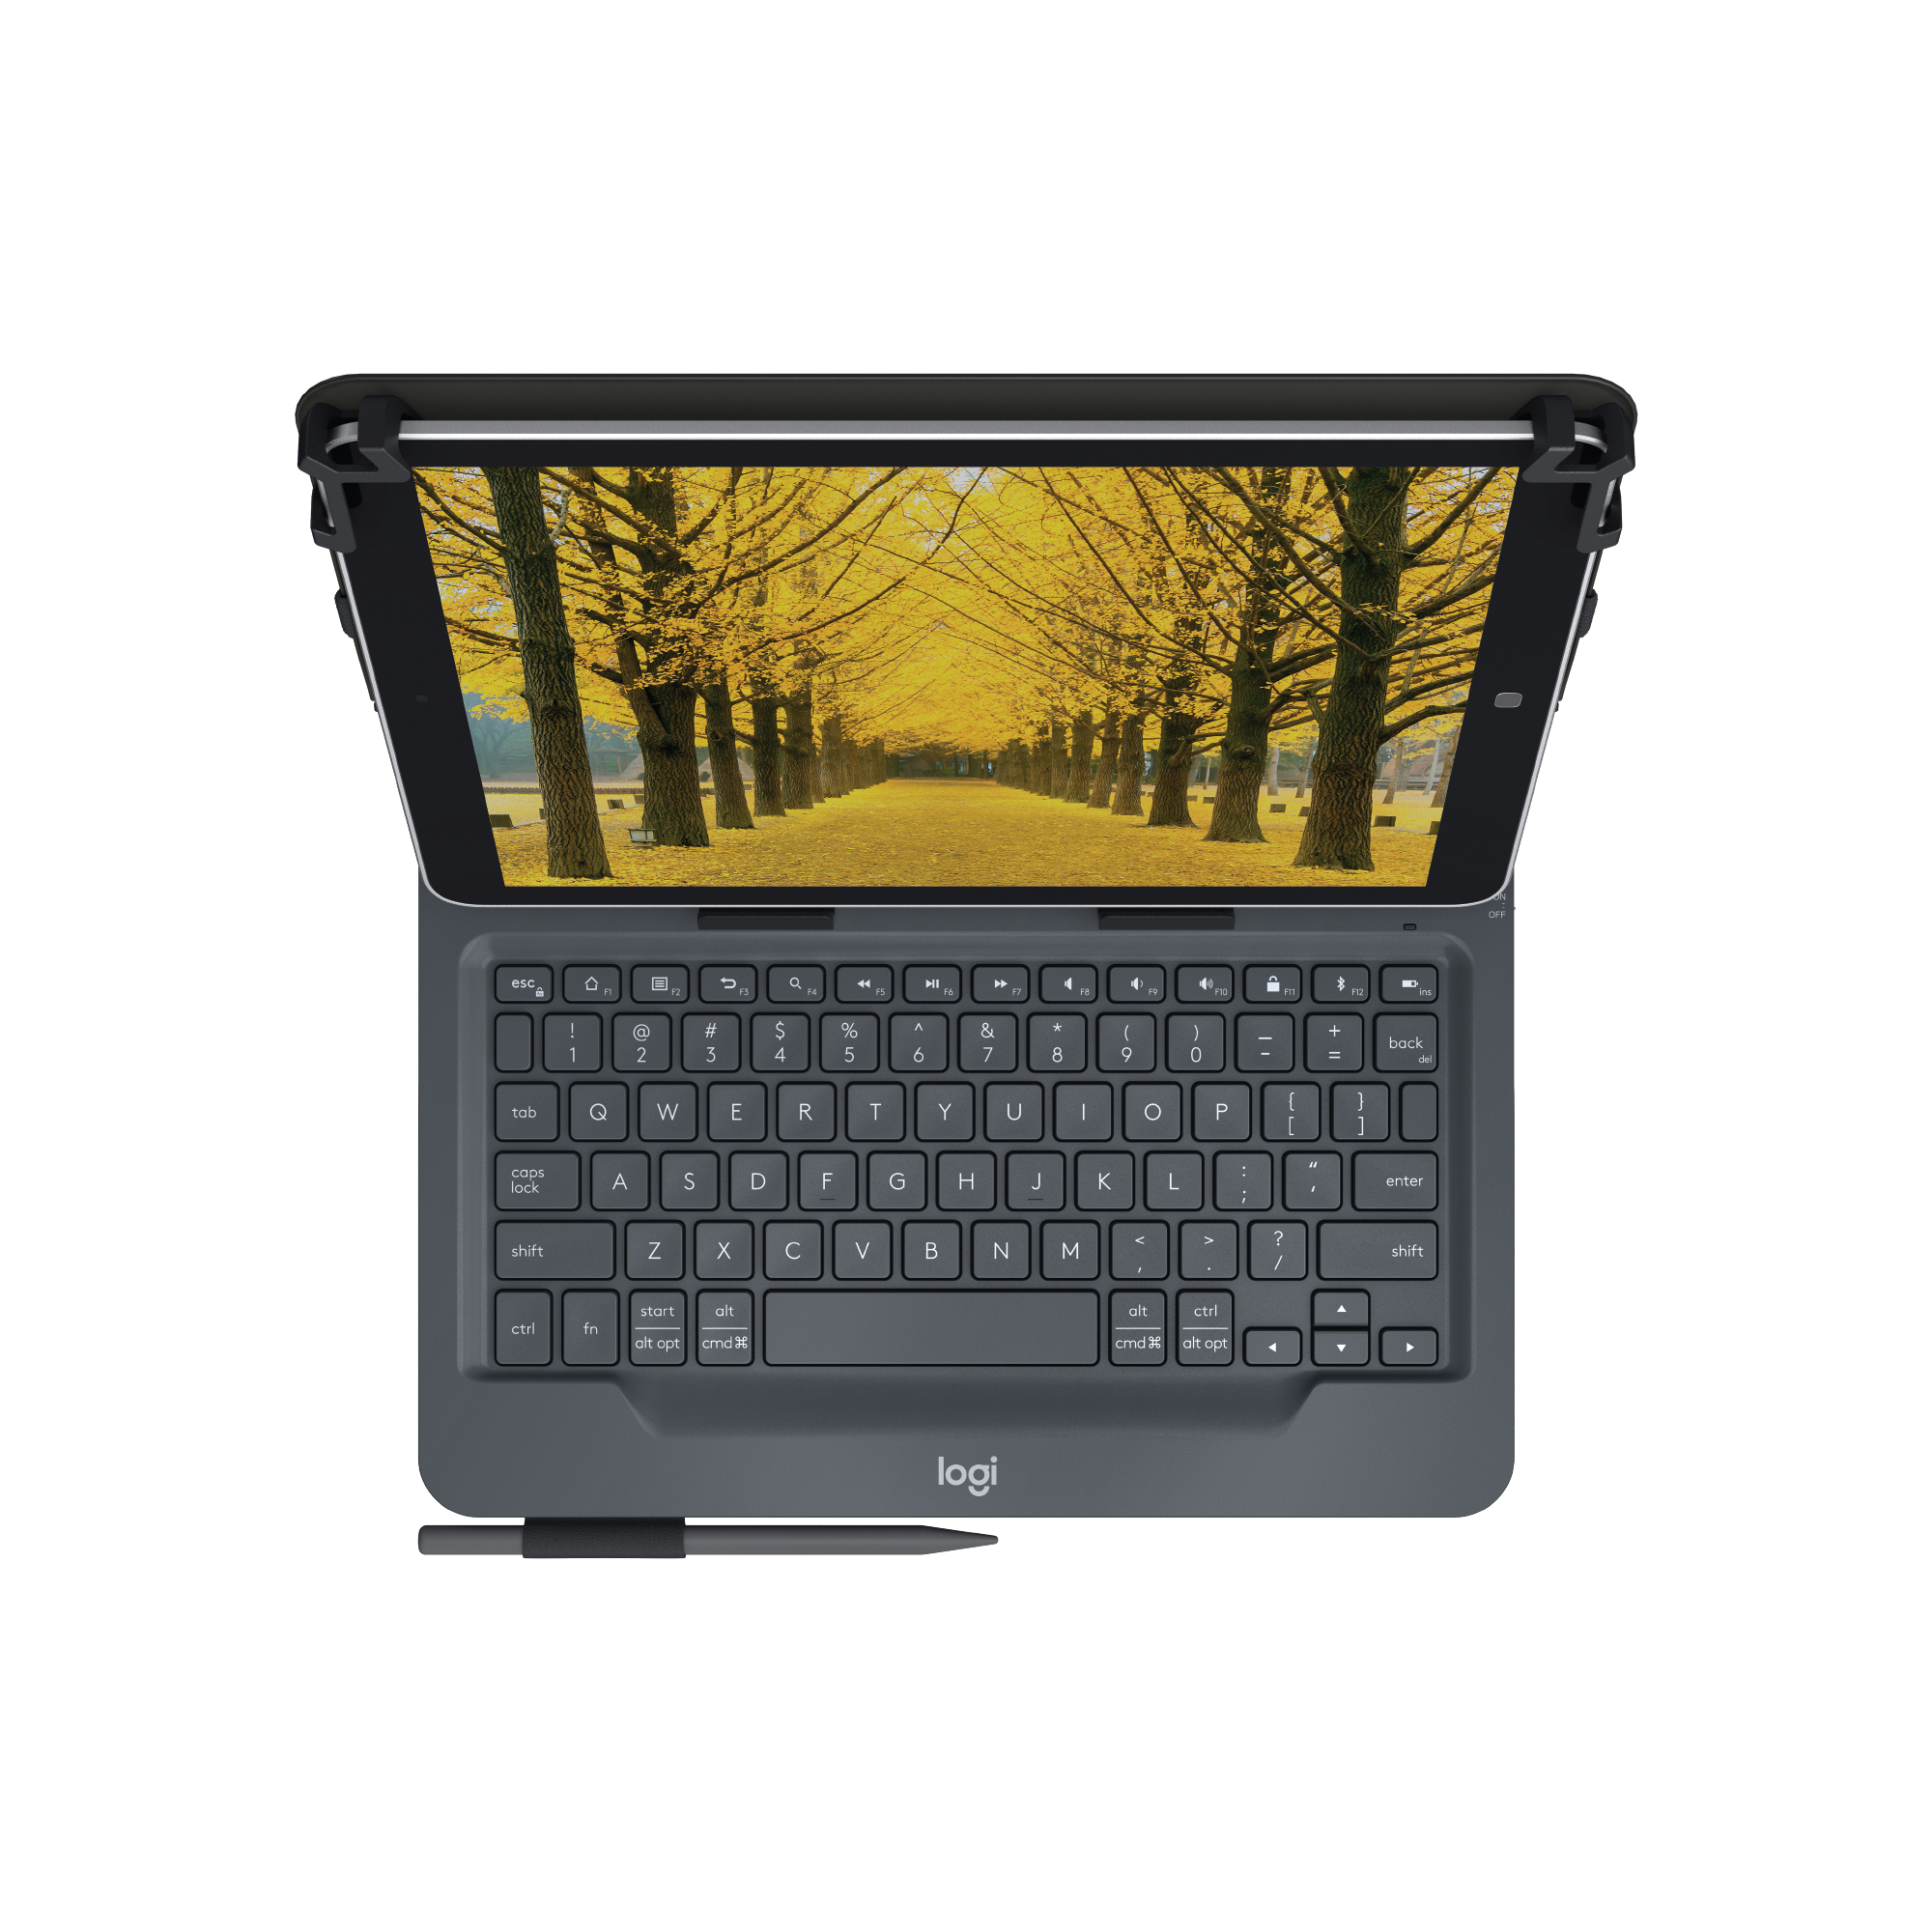 Logitech Universal Folio with integrated keyboard for 9-10 inch tablets Black Bluetooth QWERTY UK English - 920-008341